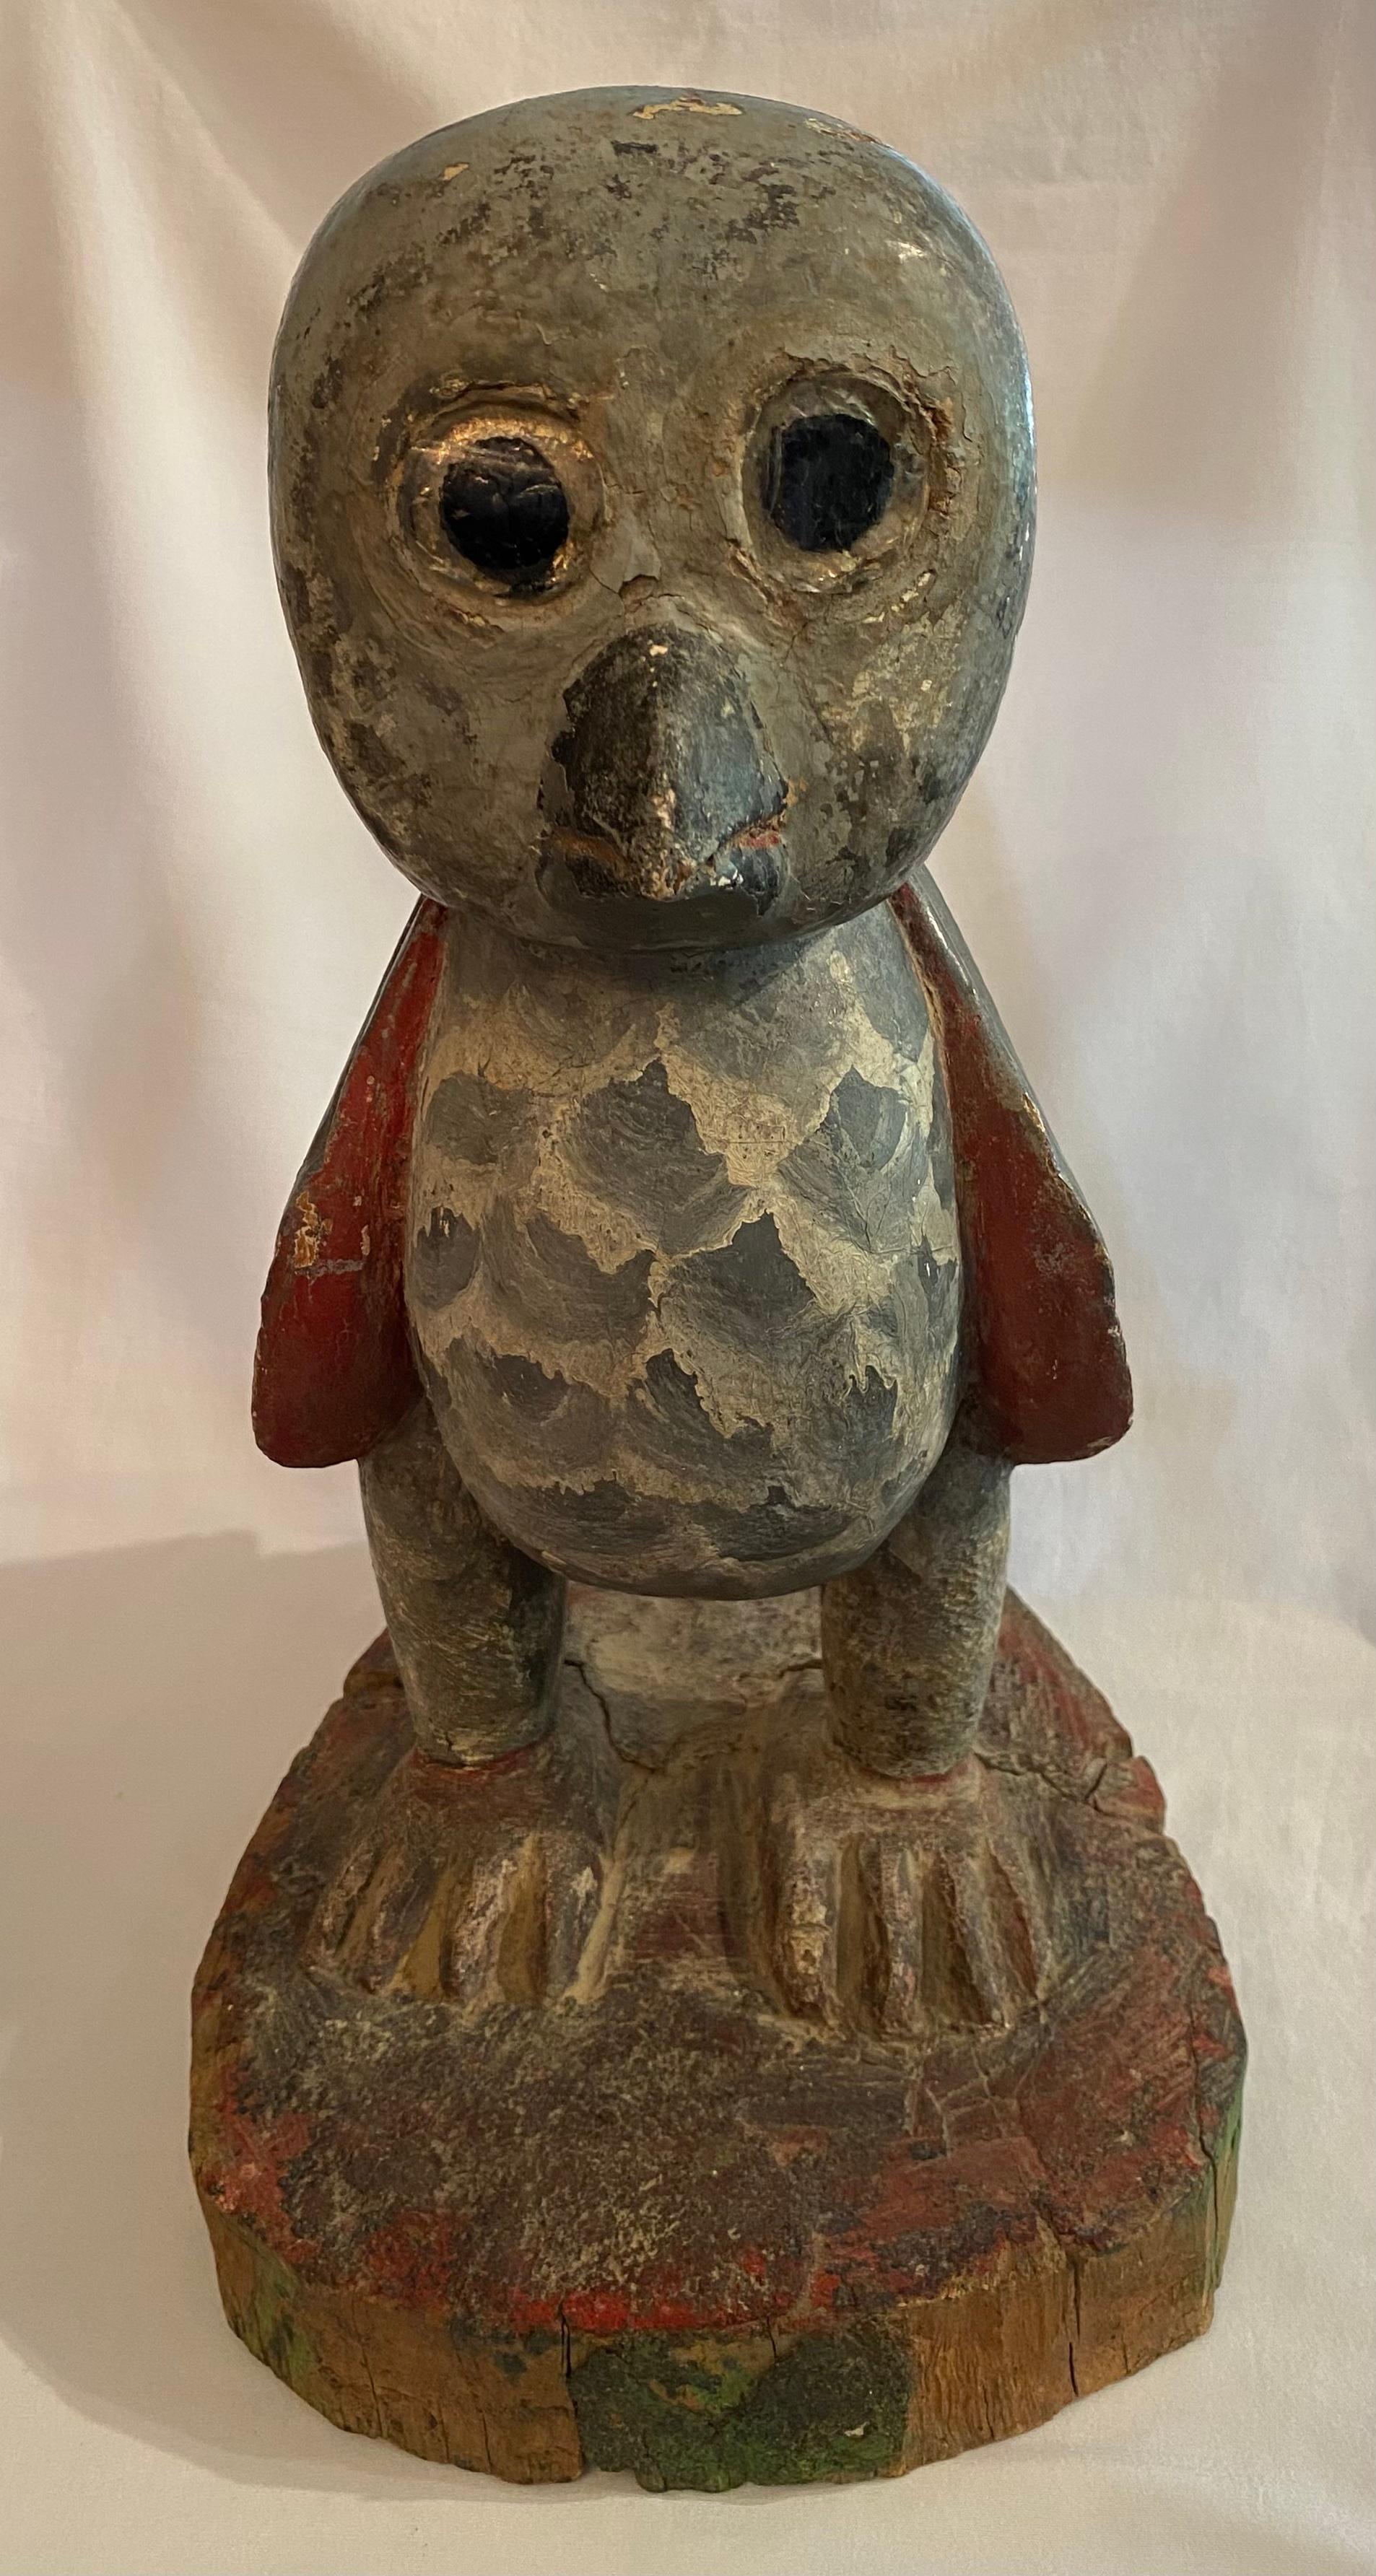 Elevate your decor with the 15-inch tall Painted and Decorated Wooden Owl Statuette. Handcrafted from wood, it combines intricate detailing with vibrant colors, adding a touch of natural beauty to any space. American folk art hand carved 1940


